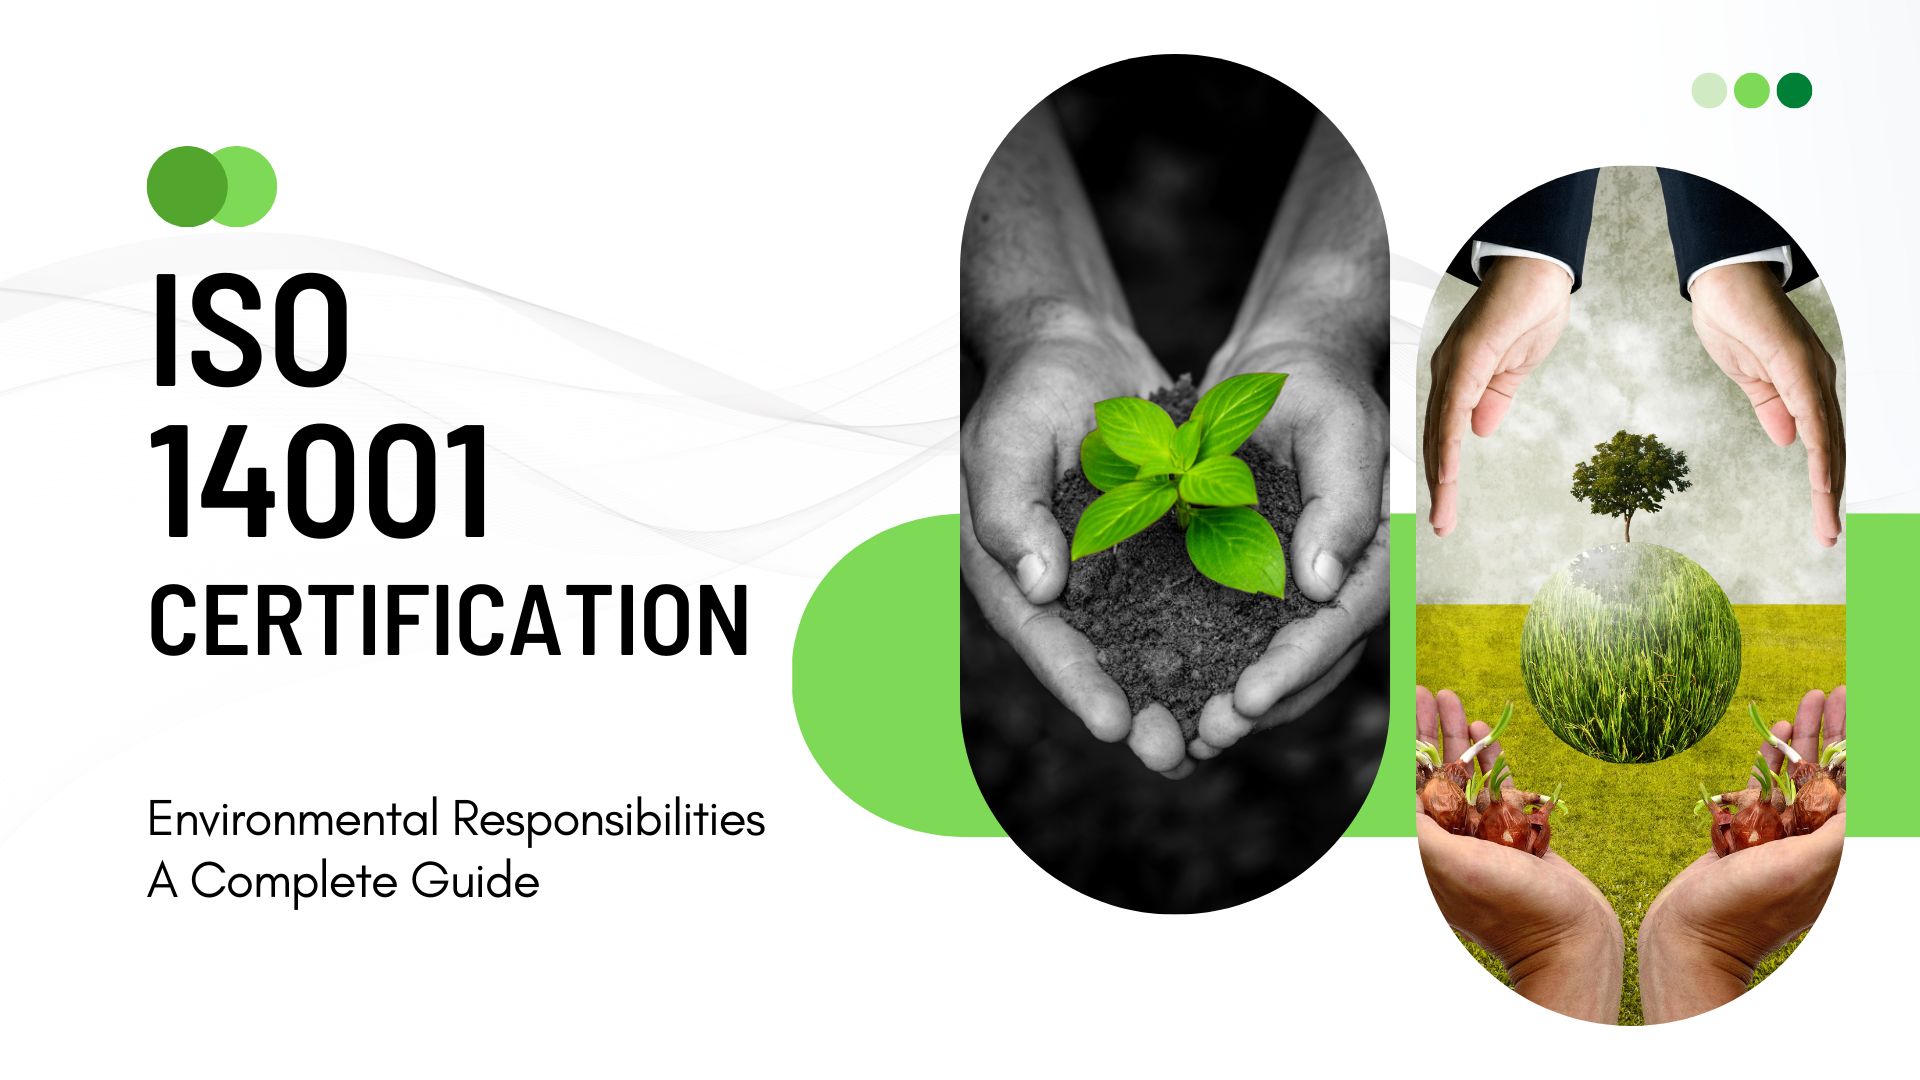 gomplete guide for ISO 14001 certification for beginners